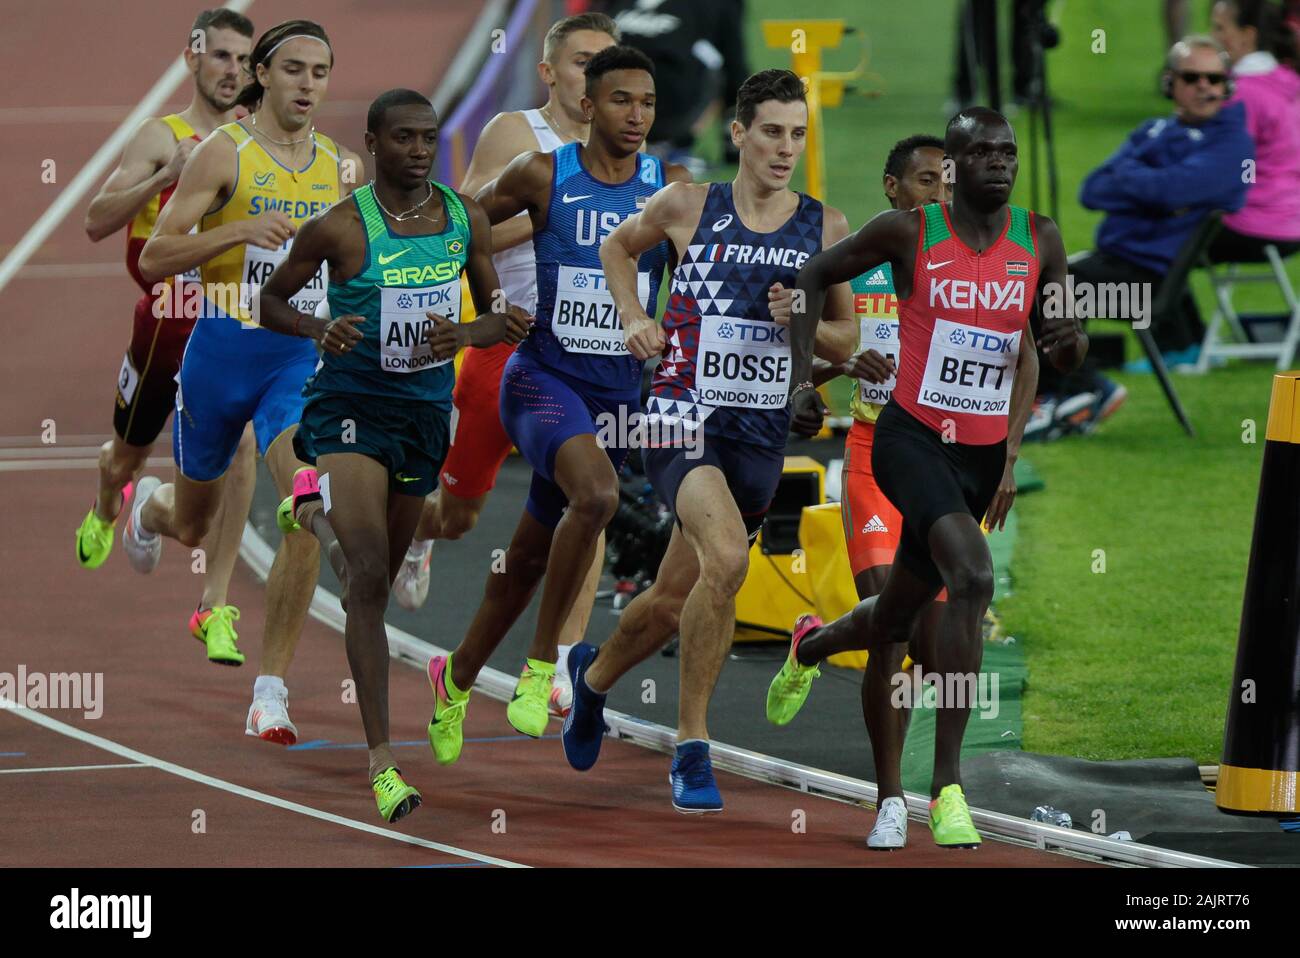 Kipyegon Bett (Kenya) , Pierre-Ambroise Bosse (French),Donavan Brazier(USA)  and Thiago do Rosário André (Brasil) during the 3nd Heats semi final 800m  Mens IAAF World Championships in Athletics on August 6, 201st at